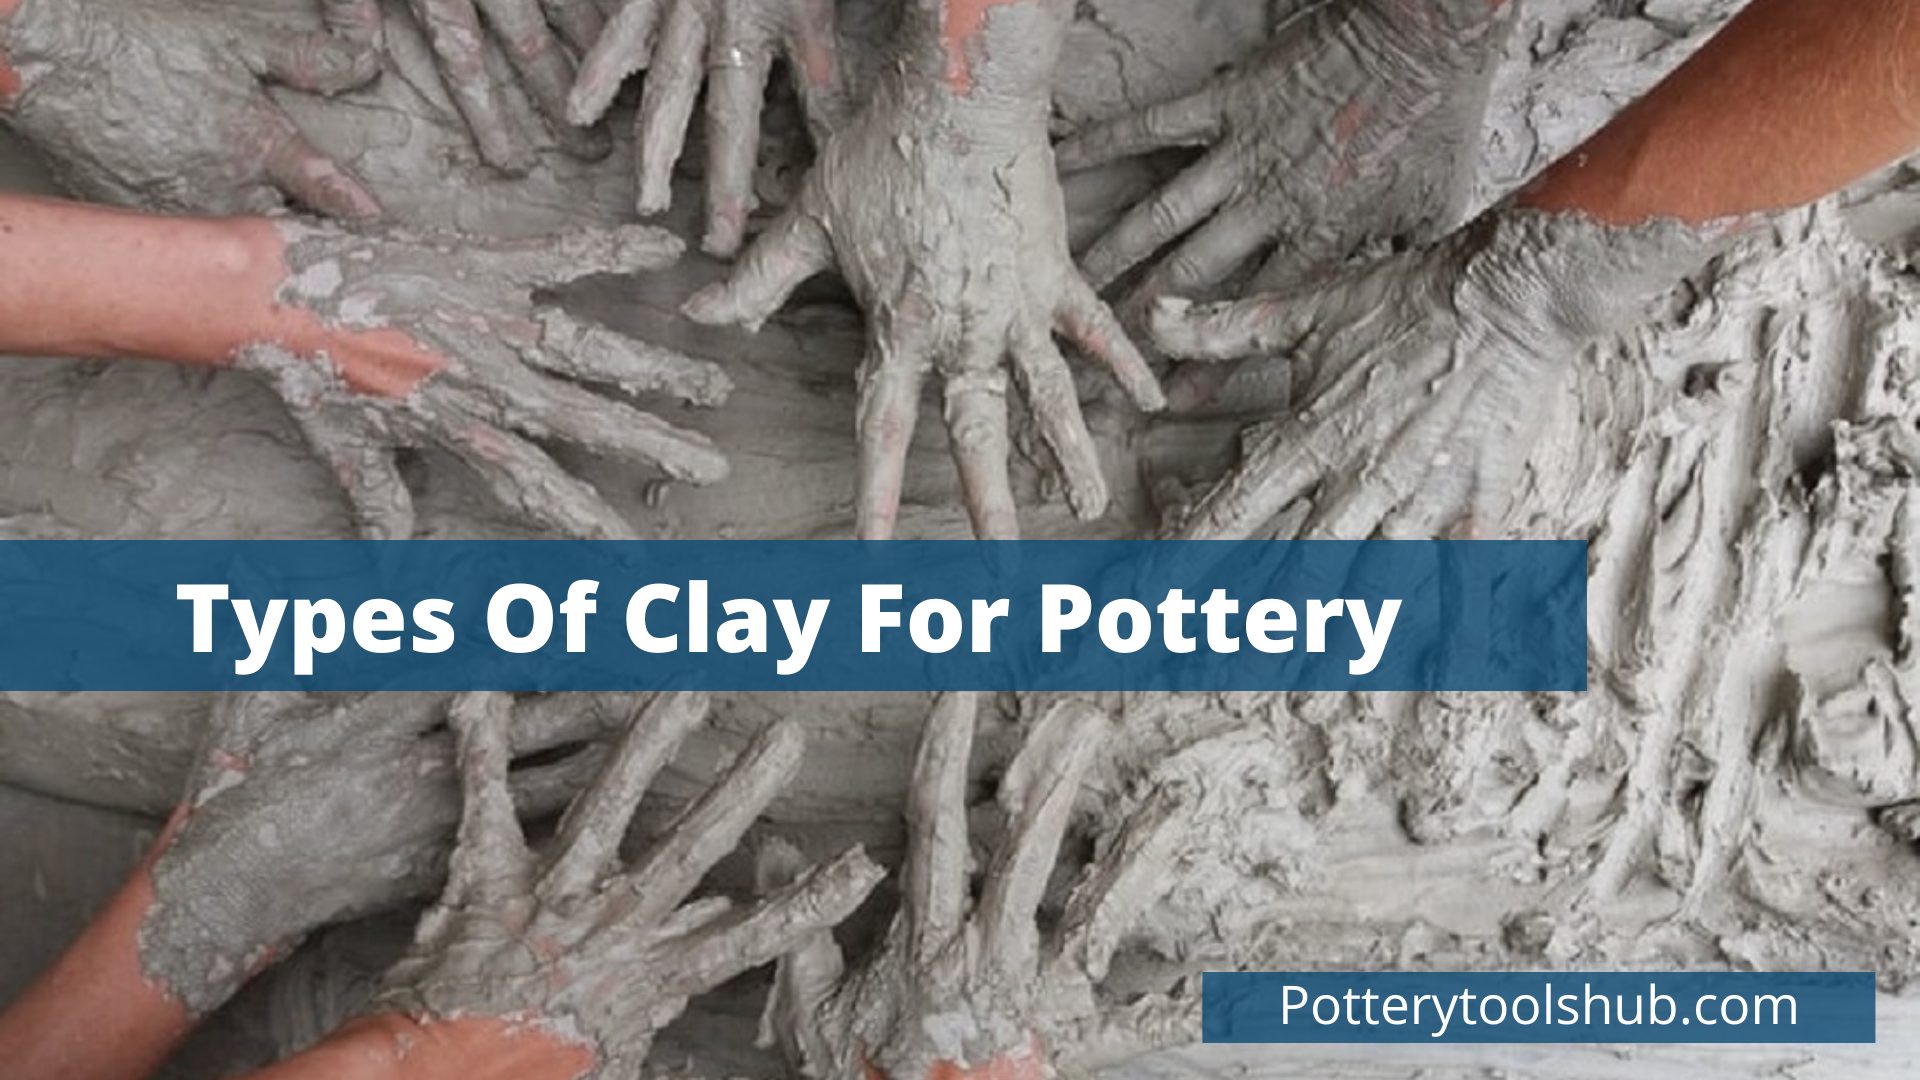 Types Of Clay For Pottery